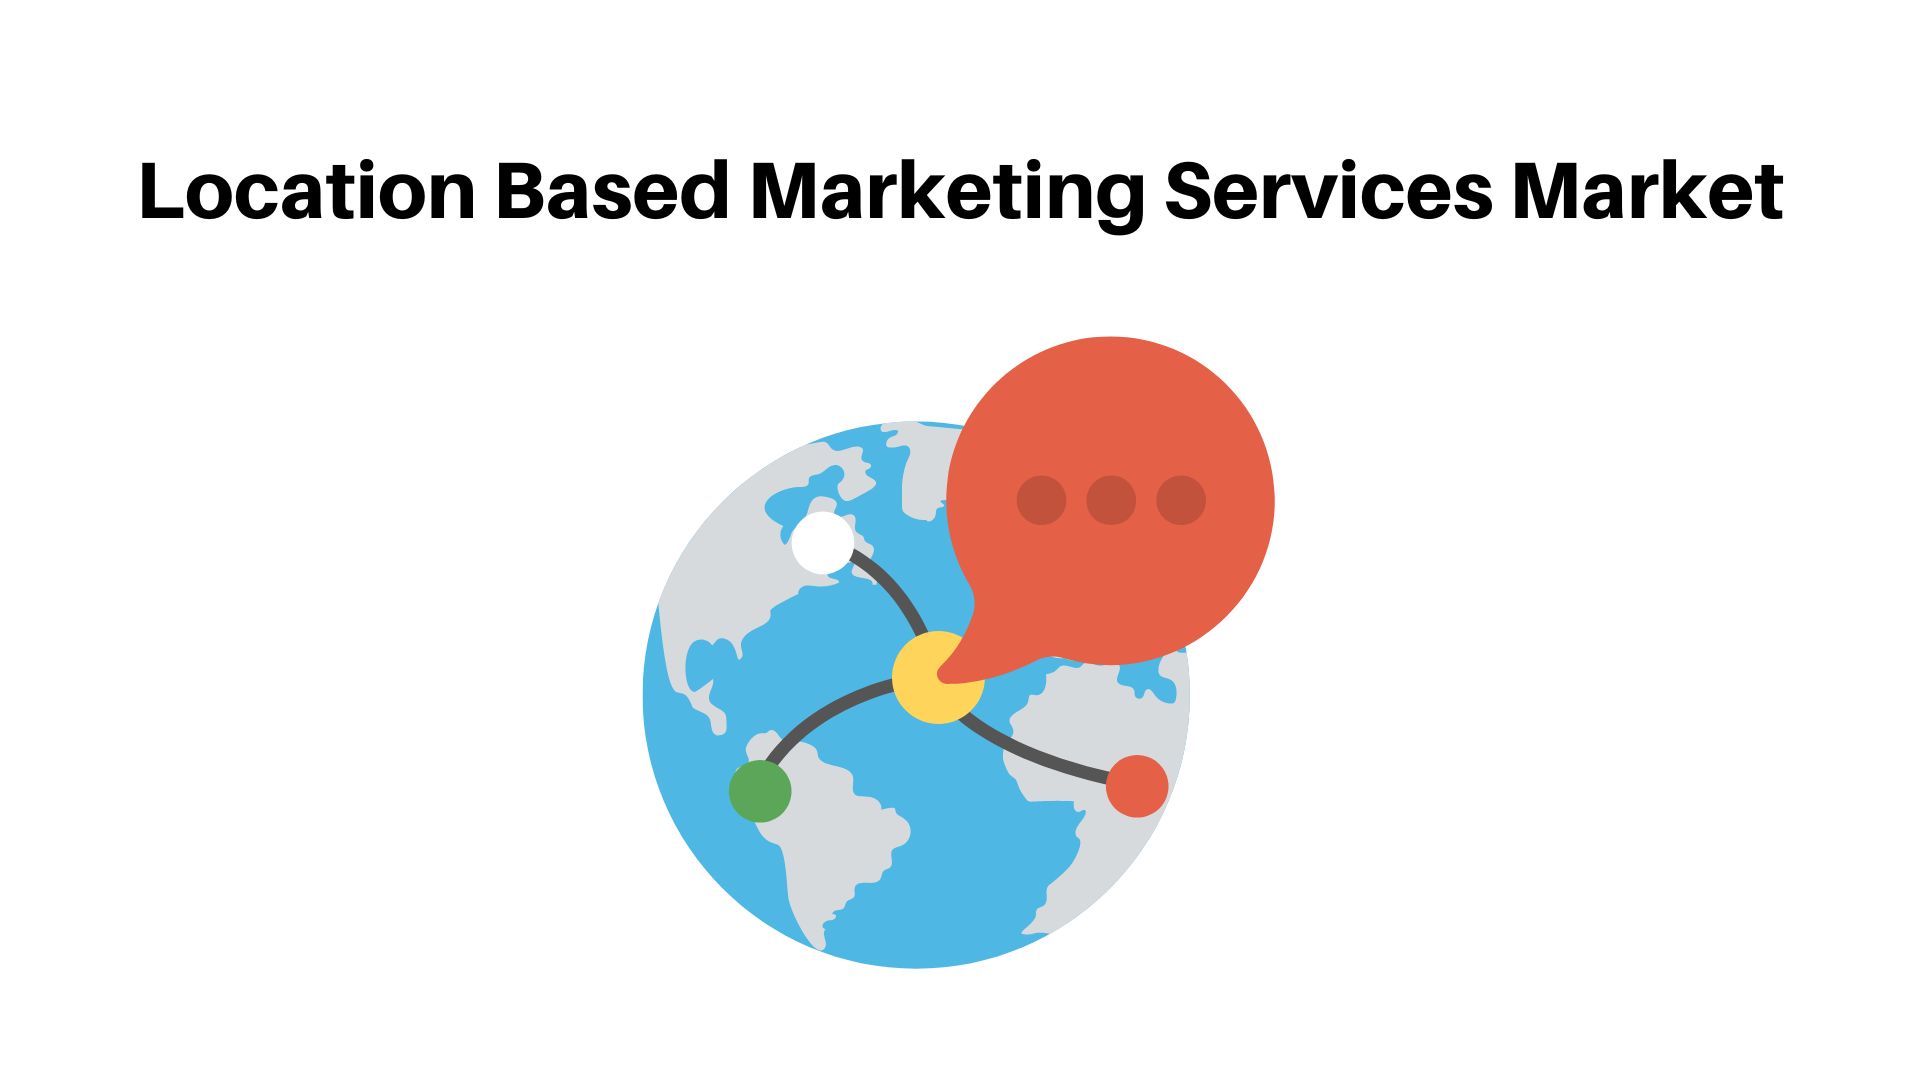 Location Based Marketing Services Market To Develop Strongly And Cross USD 298.2 Billion By 2032